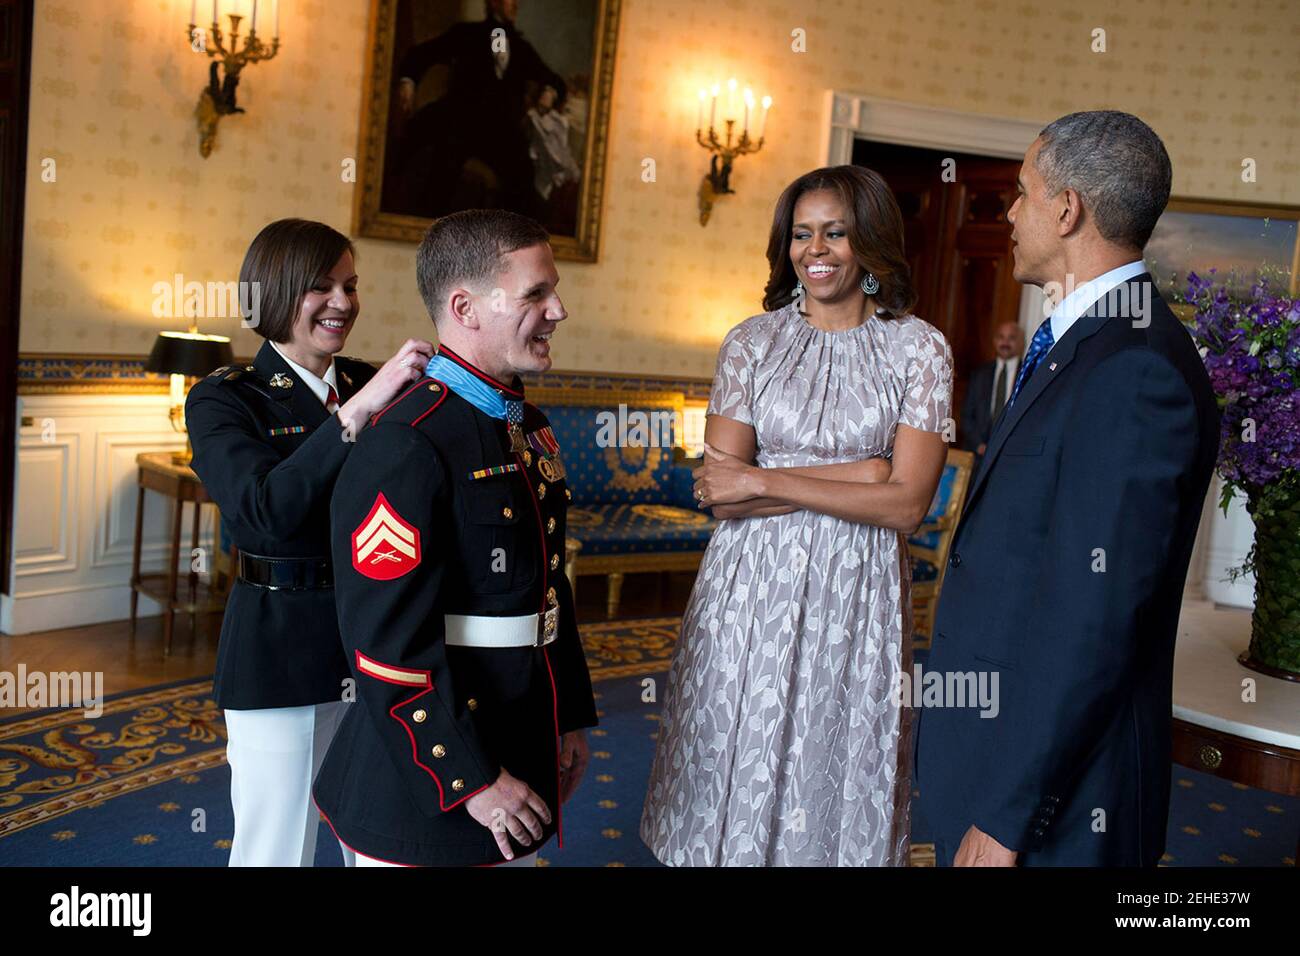 President Barack Obama and First Lady Michelle Obama talk with Corporal William 'Kyle' Carpenter, U.S. Marine Corps (Ret.) in the Blue Room following a Medal of Honor ceremony in the East Room of the White House, June 19, 2014. Cpl. Carpenter received the Medal of Honor for his courageous actions while serving as an Automatic Rifleman with Company F, 2d Battalion, 9th Marines, Regimental Combat Team 1, 1st Marine Division (Forward), I  Marine Expeditionary Force (Forward), in Helmand Province, Afghanistan. Stock Photo